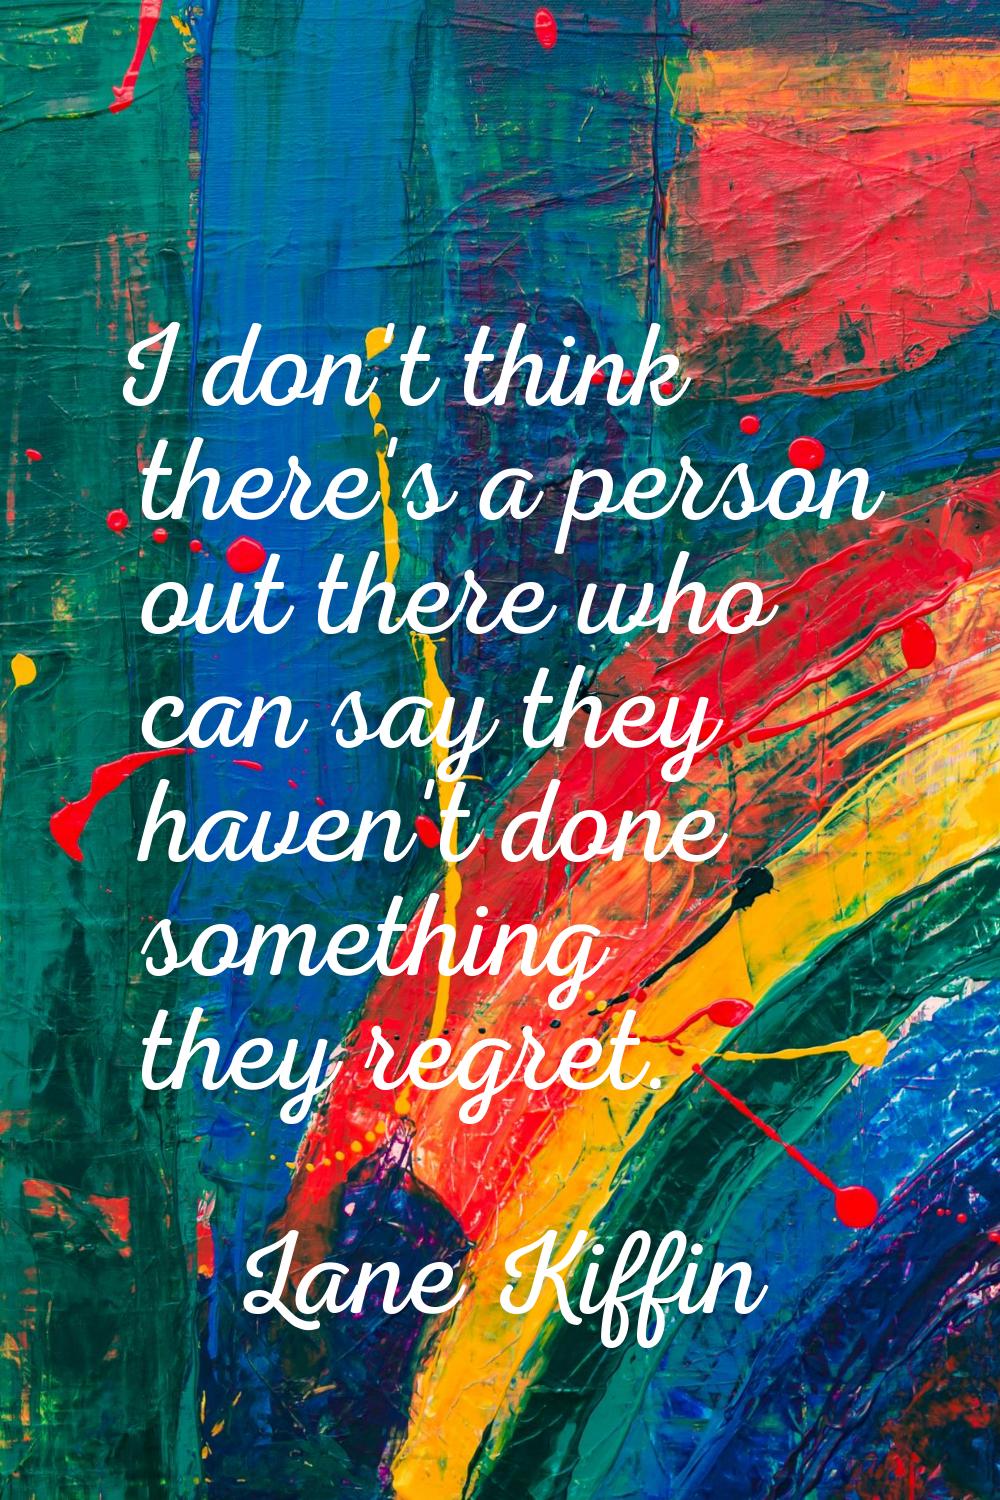 I don't think there's a person out there who can say they haven't done something they regret.